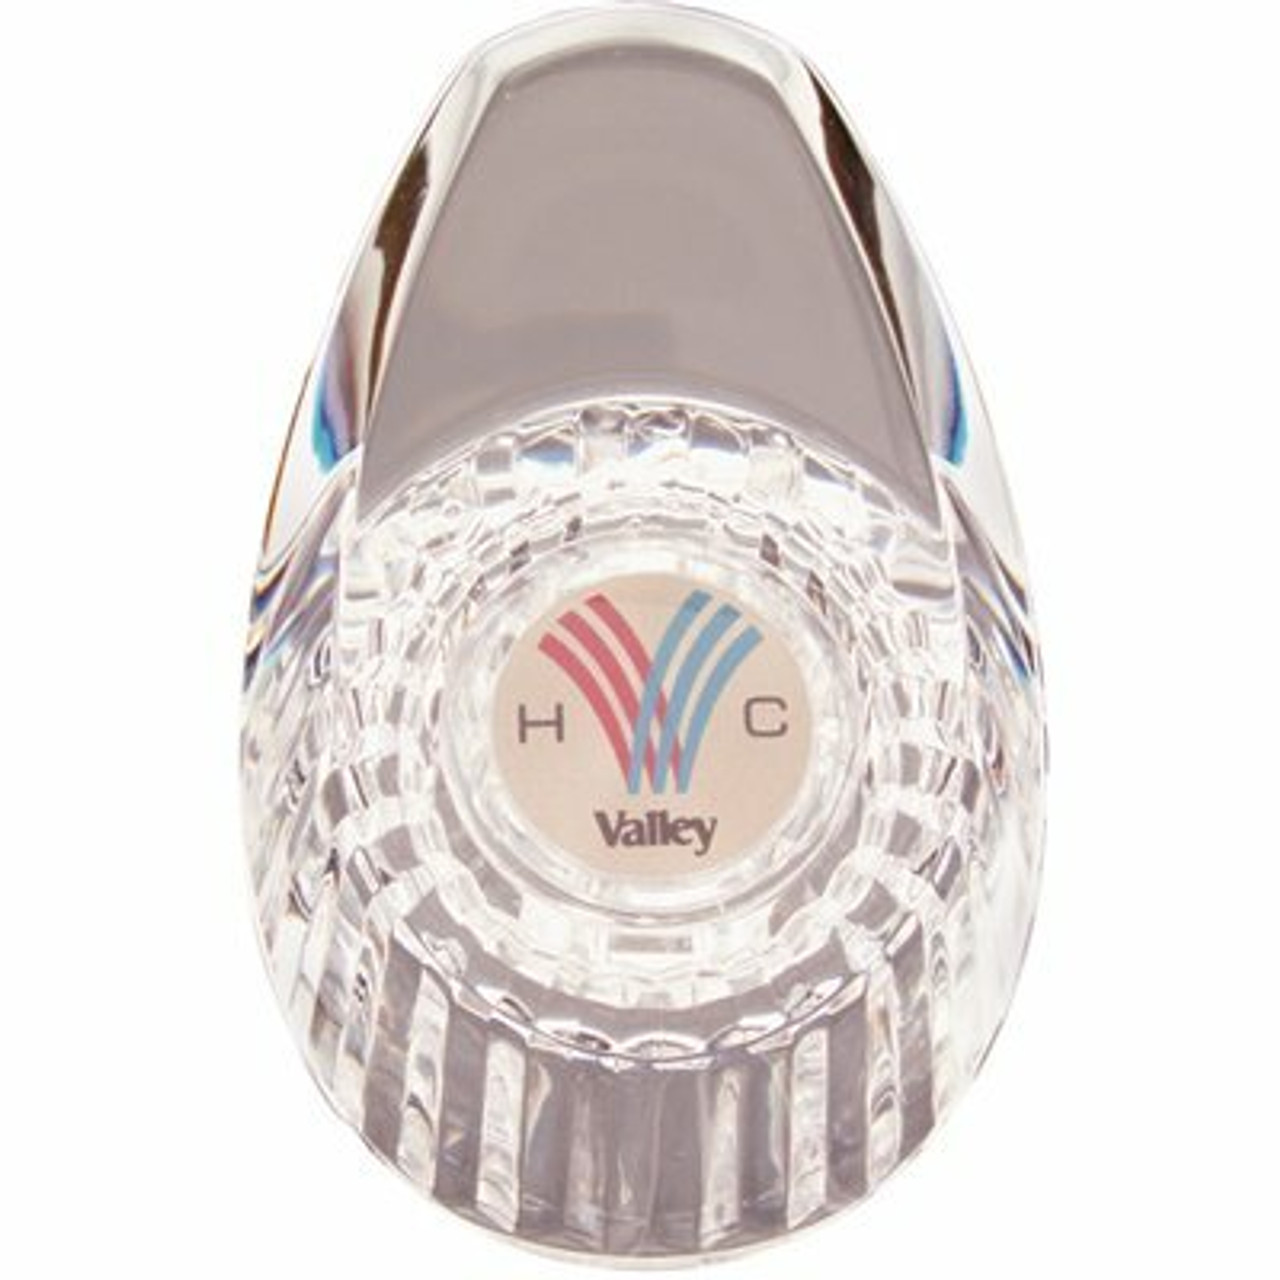 Danco Faucet Handle For Valley In Clear Acrylic